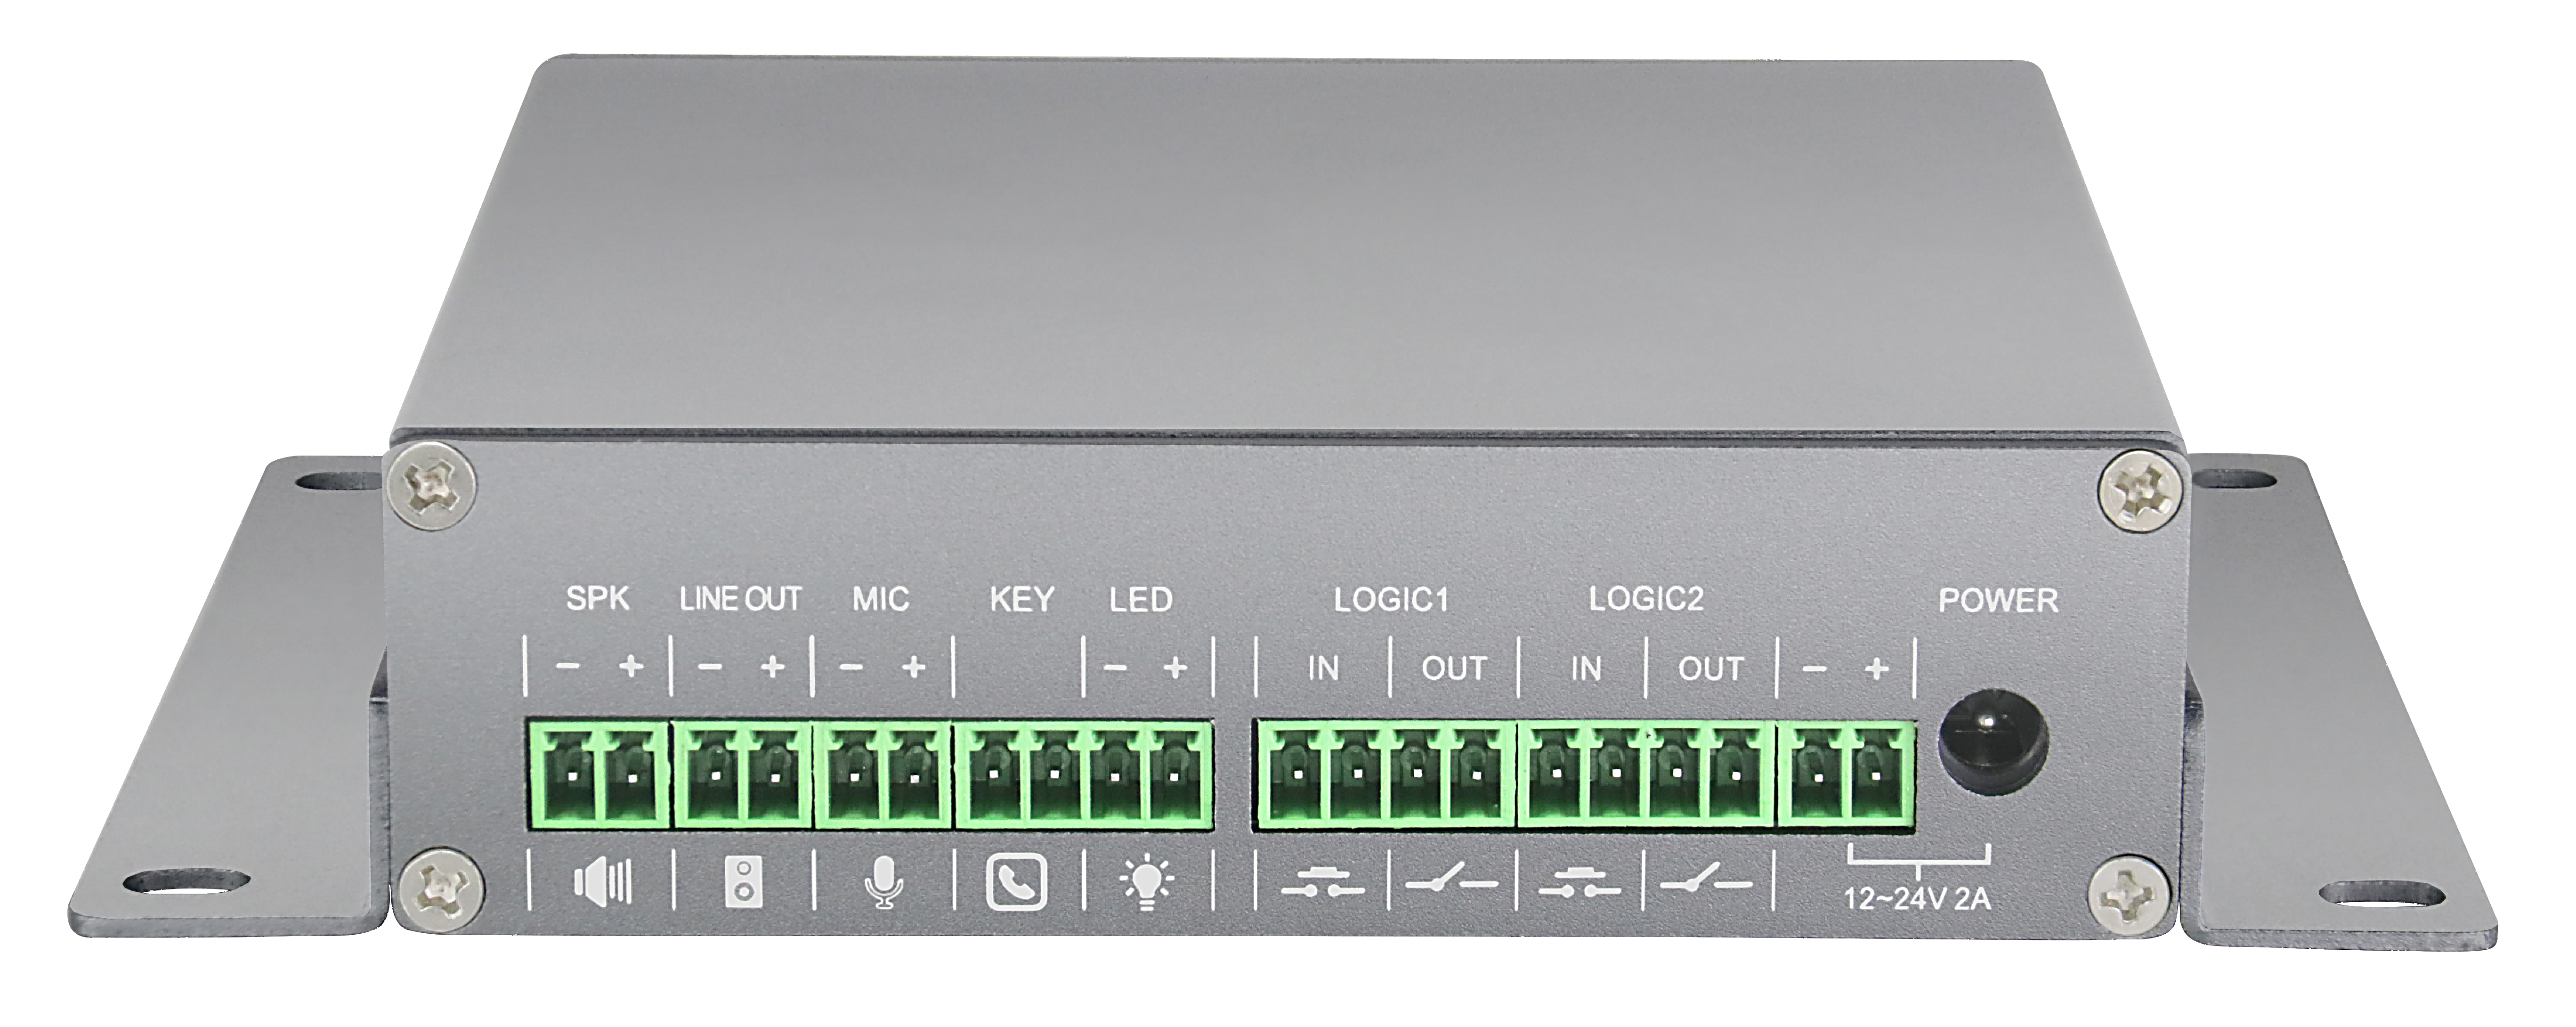 SIP-T300,a multifunction audio gateway with rich functions,  convenient and multi-role